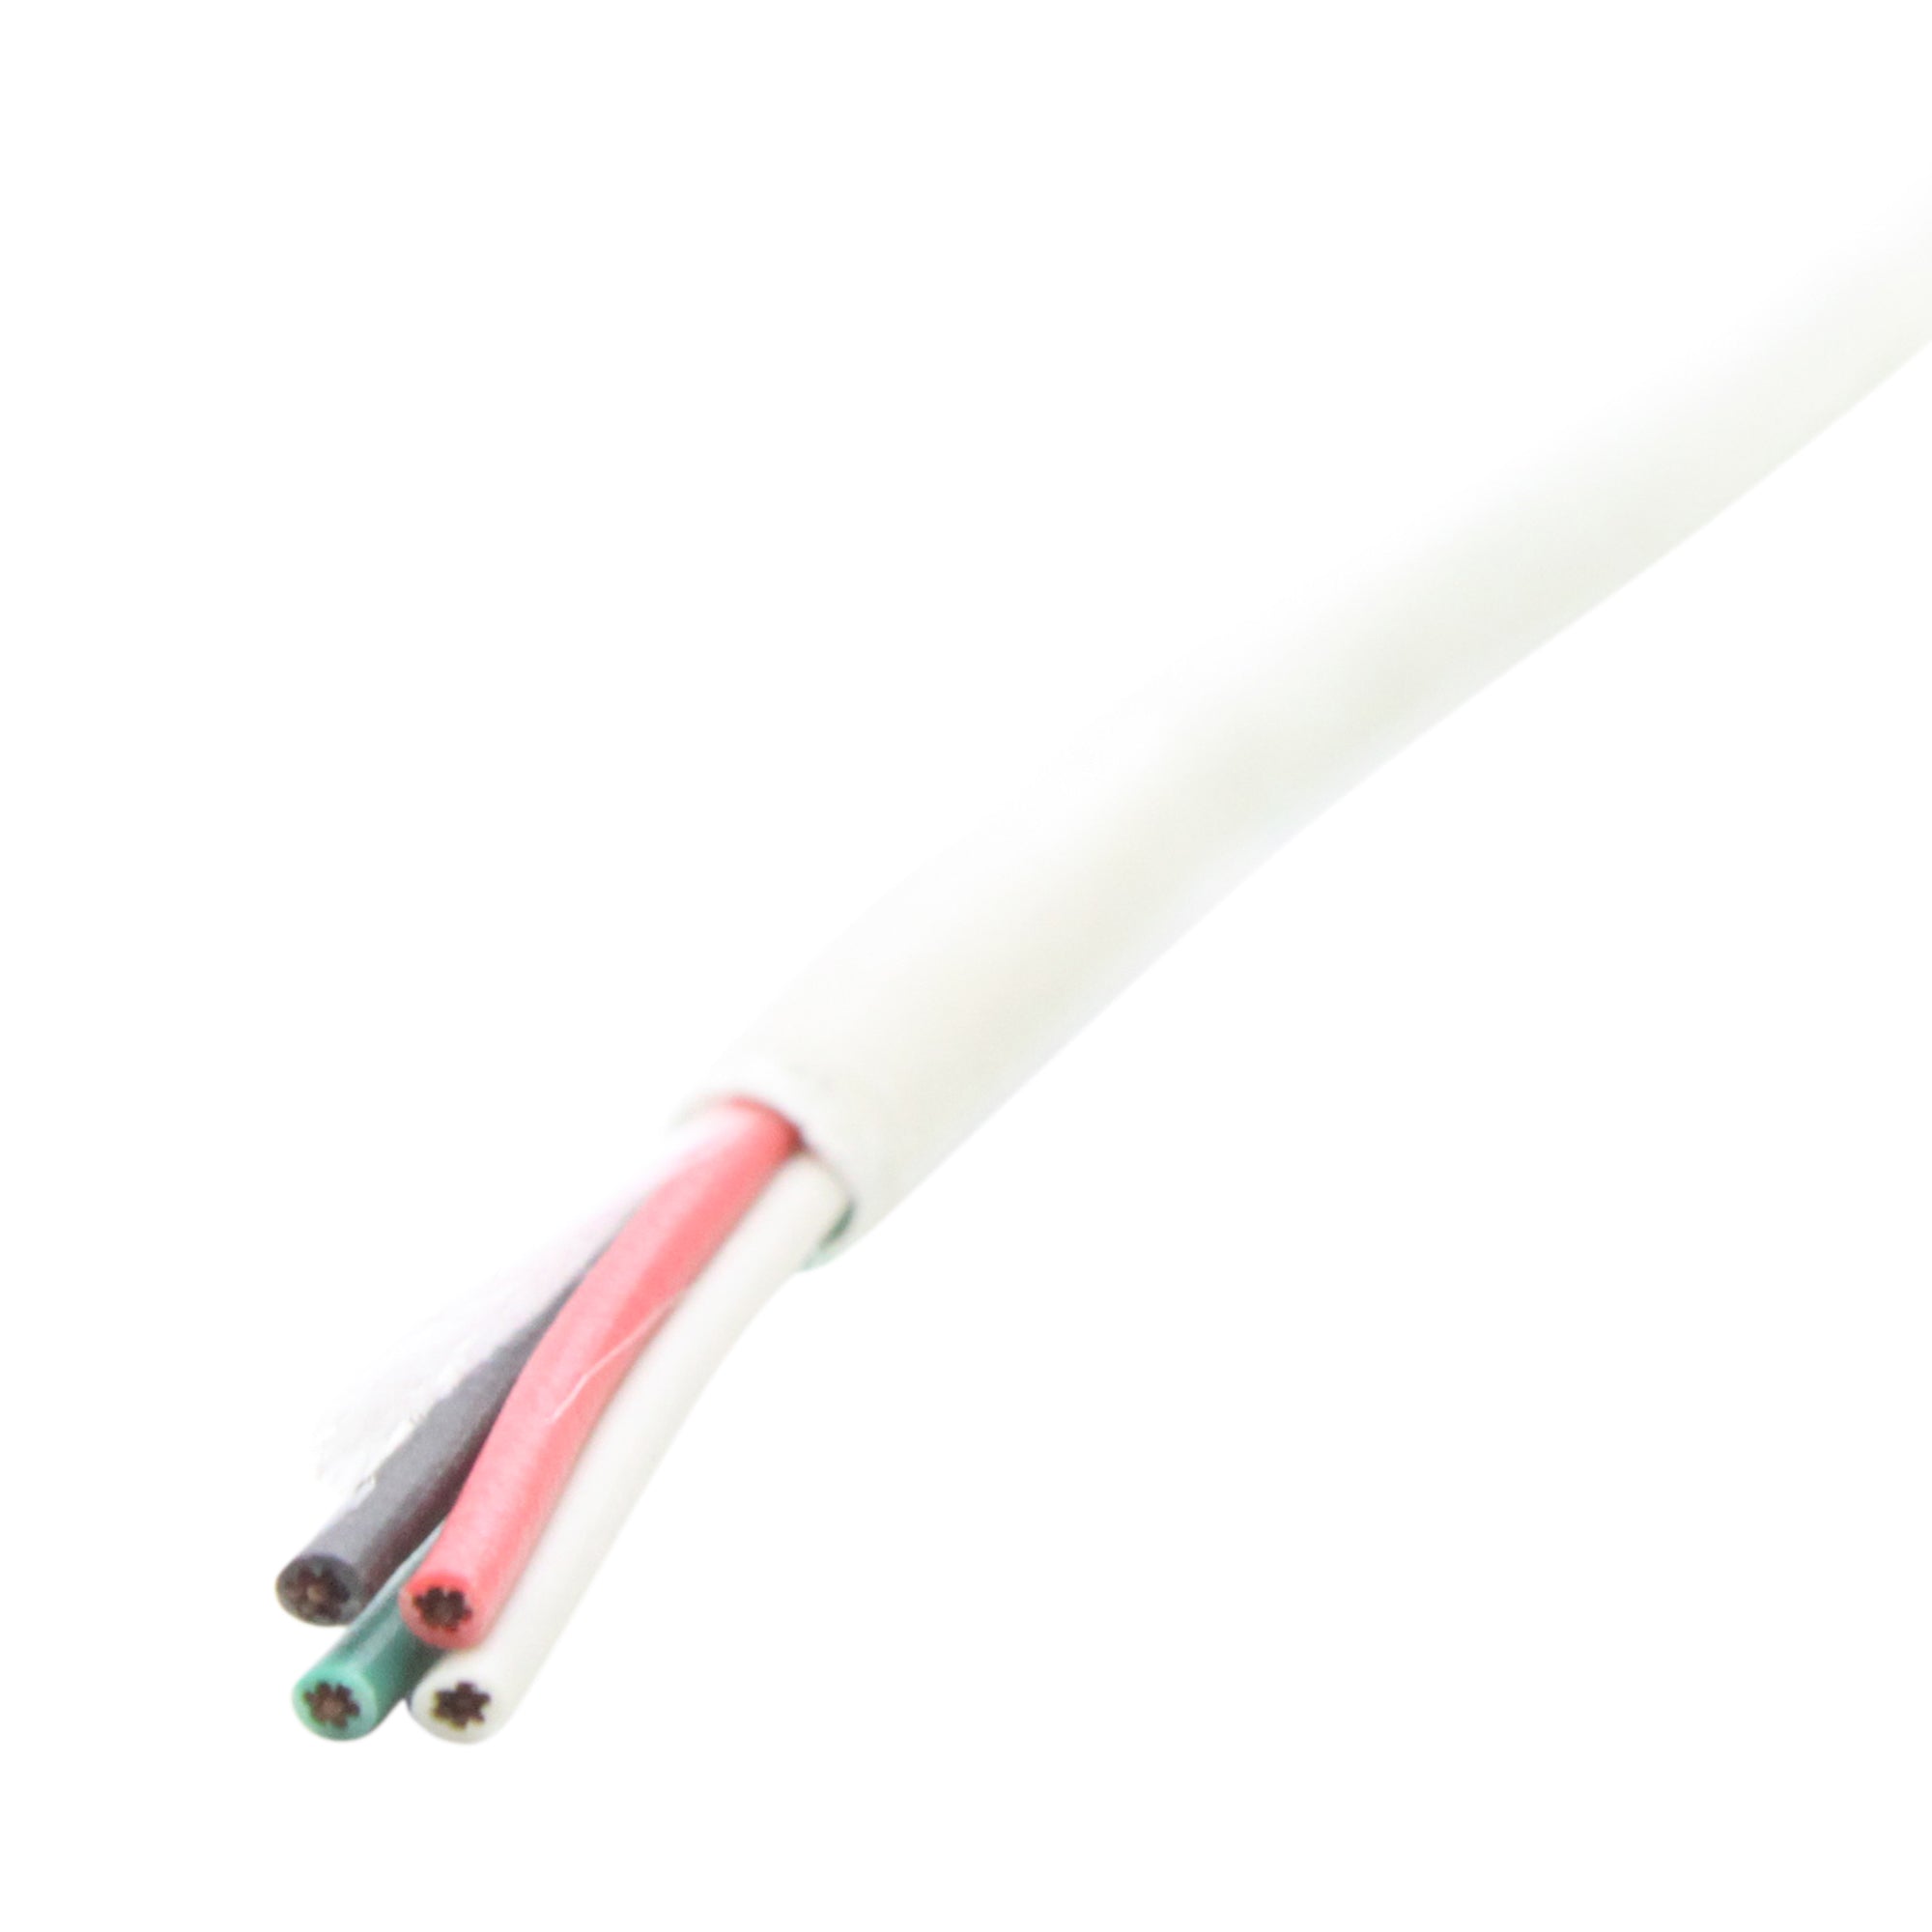 FASTER CABLE, FASTER CABLE P224C-WHT/LTGRN 22AWG 4C STR CABLE, PLENUM, WHITE/LT GREEN, 1000'